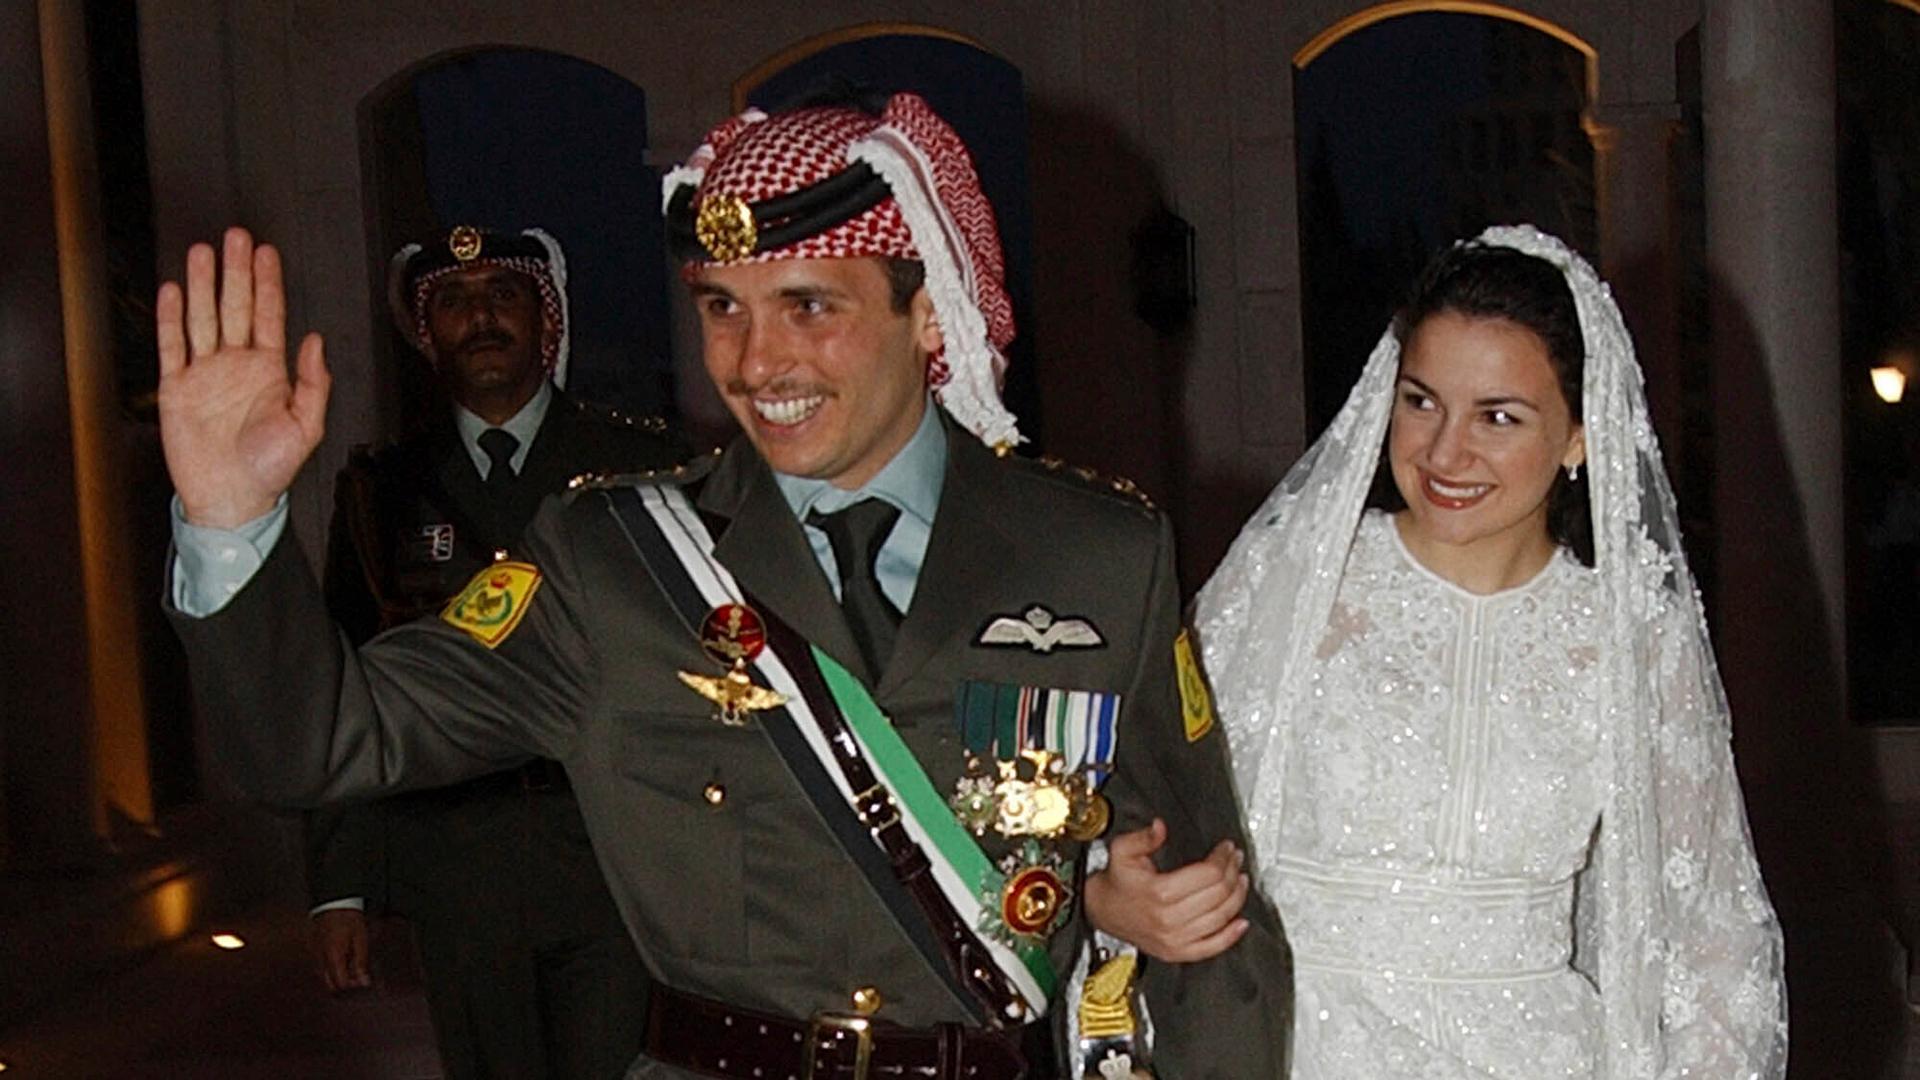 Prince Hamzah waves, wearing a military uniform walks with his bride, Prince Noor, wearing a white wedding dress and they both smile. 